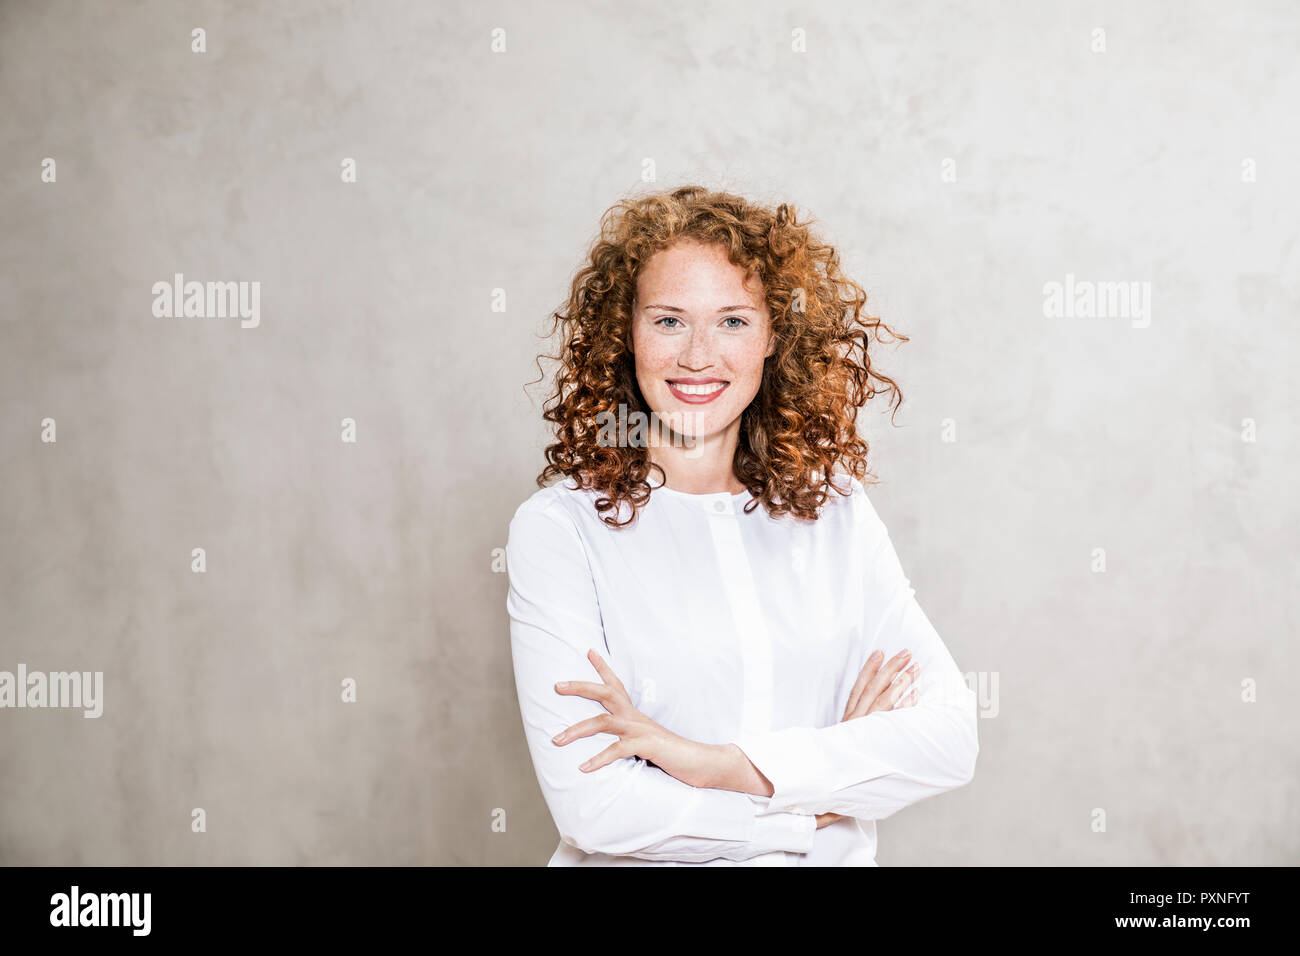 Portrait of laughing redheaded young woman with arms crossed Stock Photo